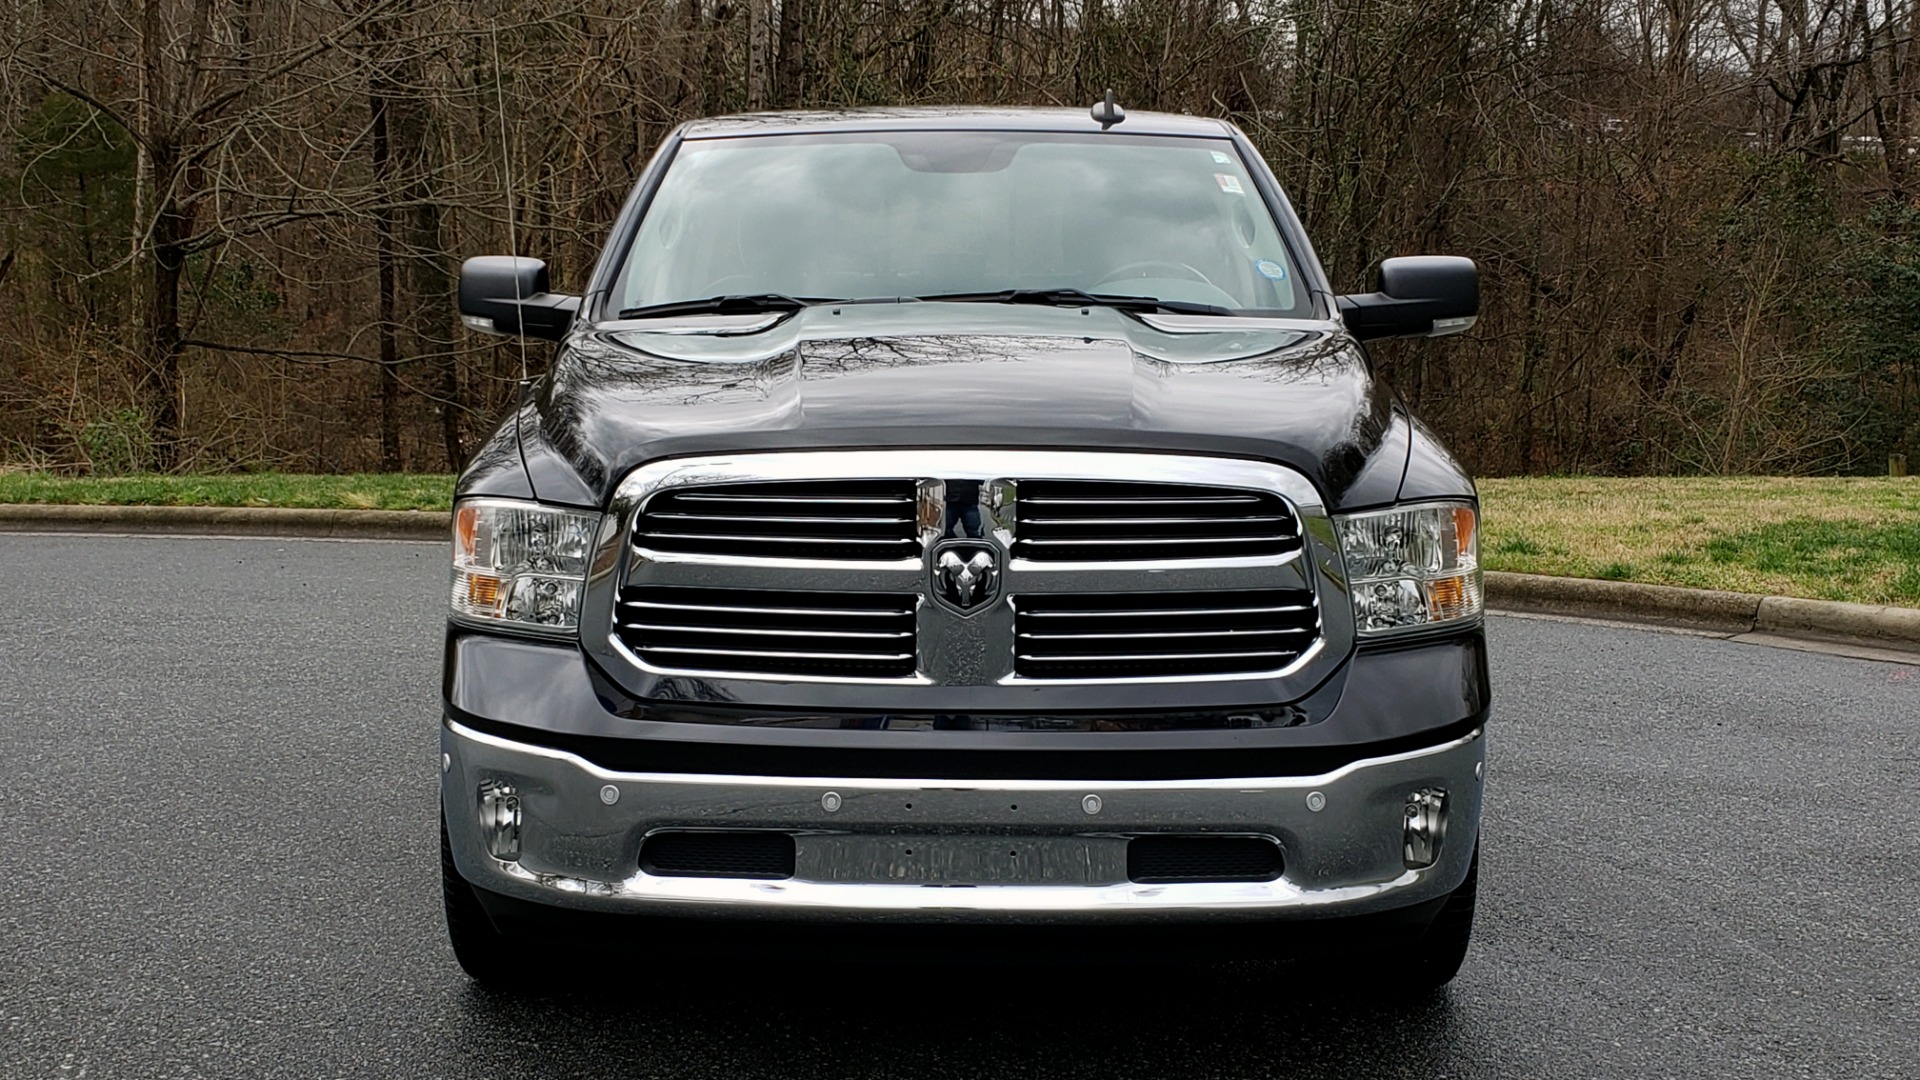 Used 2016 Ram 1500 BIG HORN 5.7L HEMI CREW CAB / HTD STS / NAV / REAVIEW for sale Sold at Formula Imports in Charlotte NC 28227 19